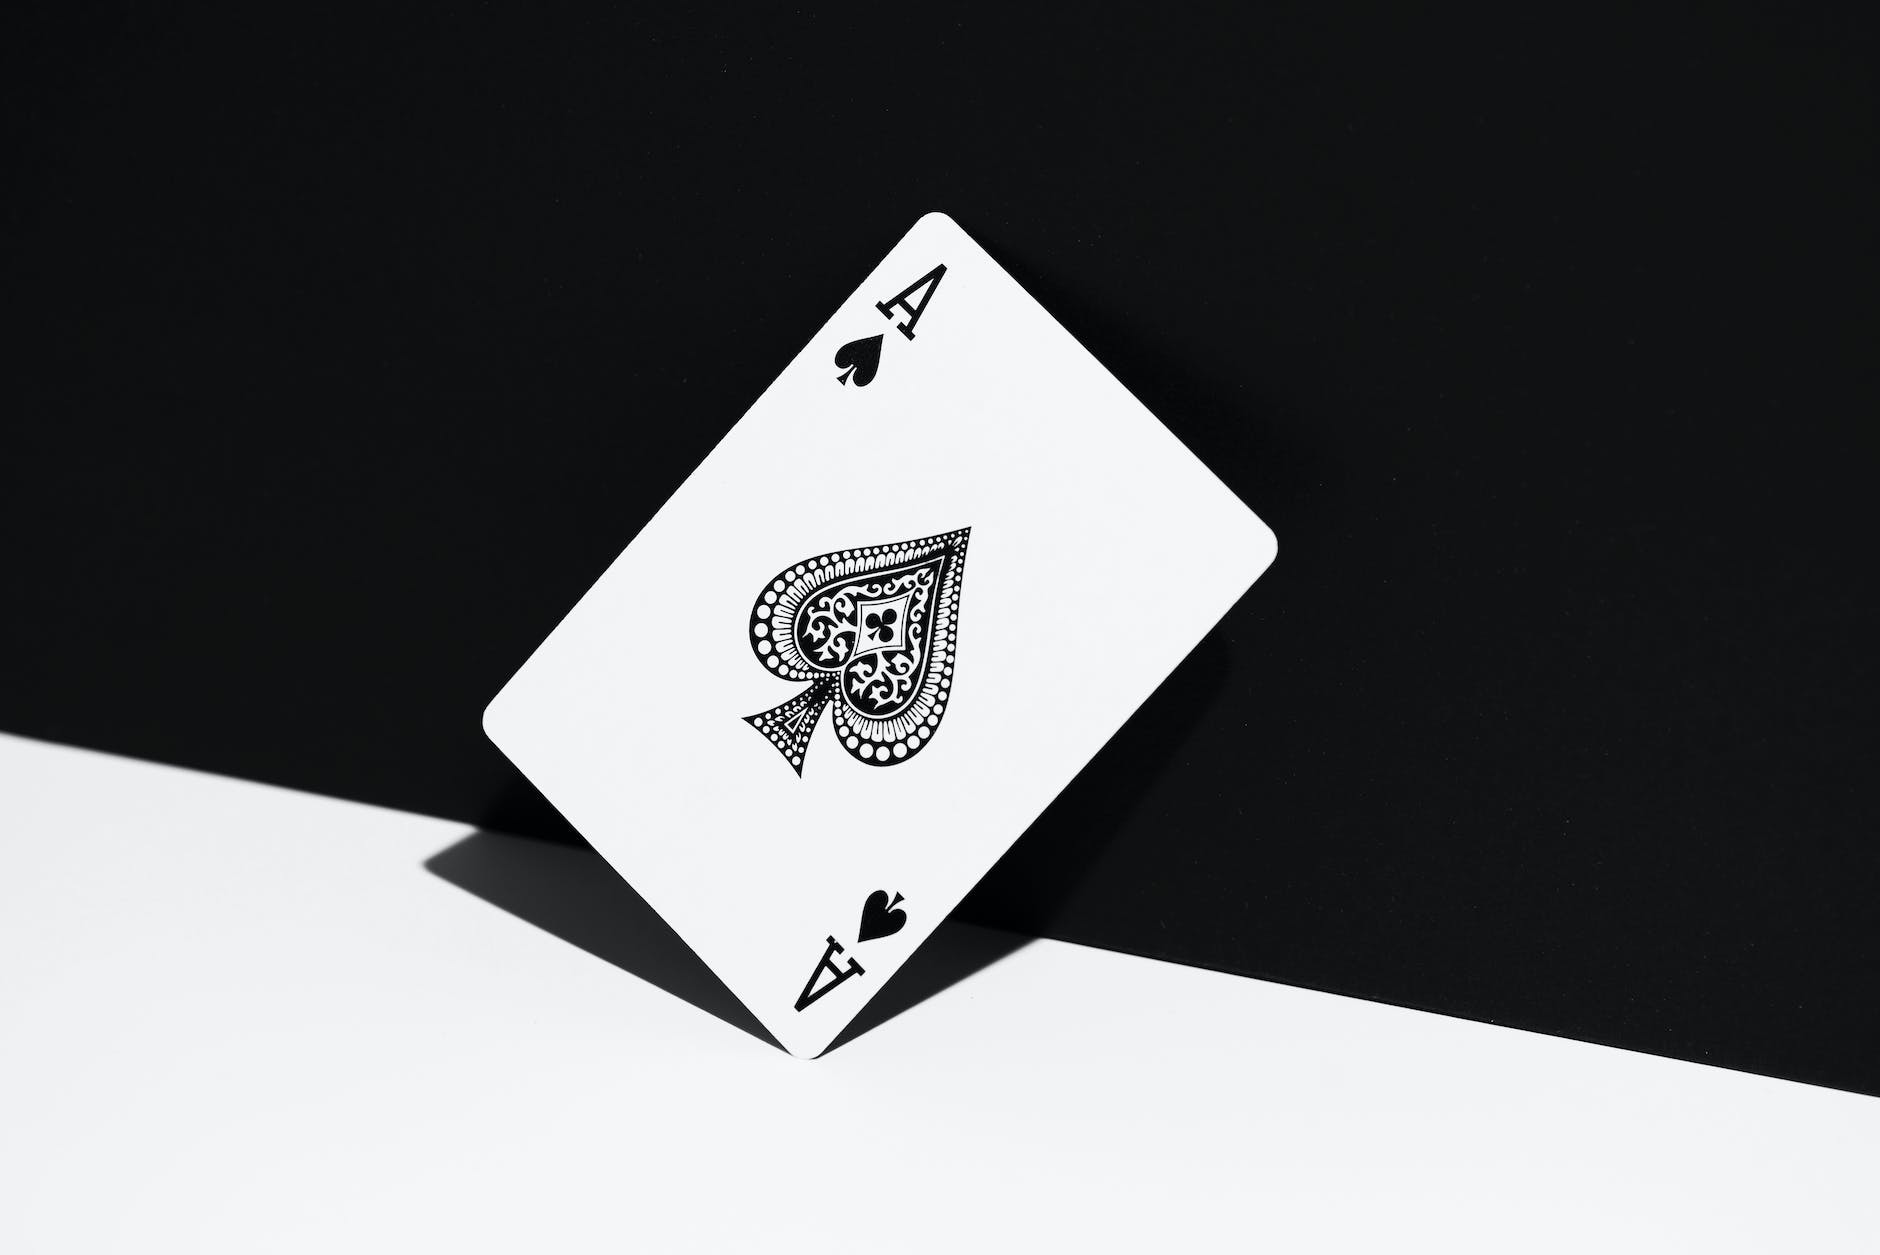 photograph of an ace playing card